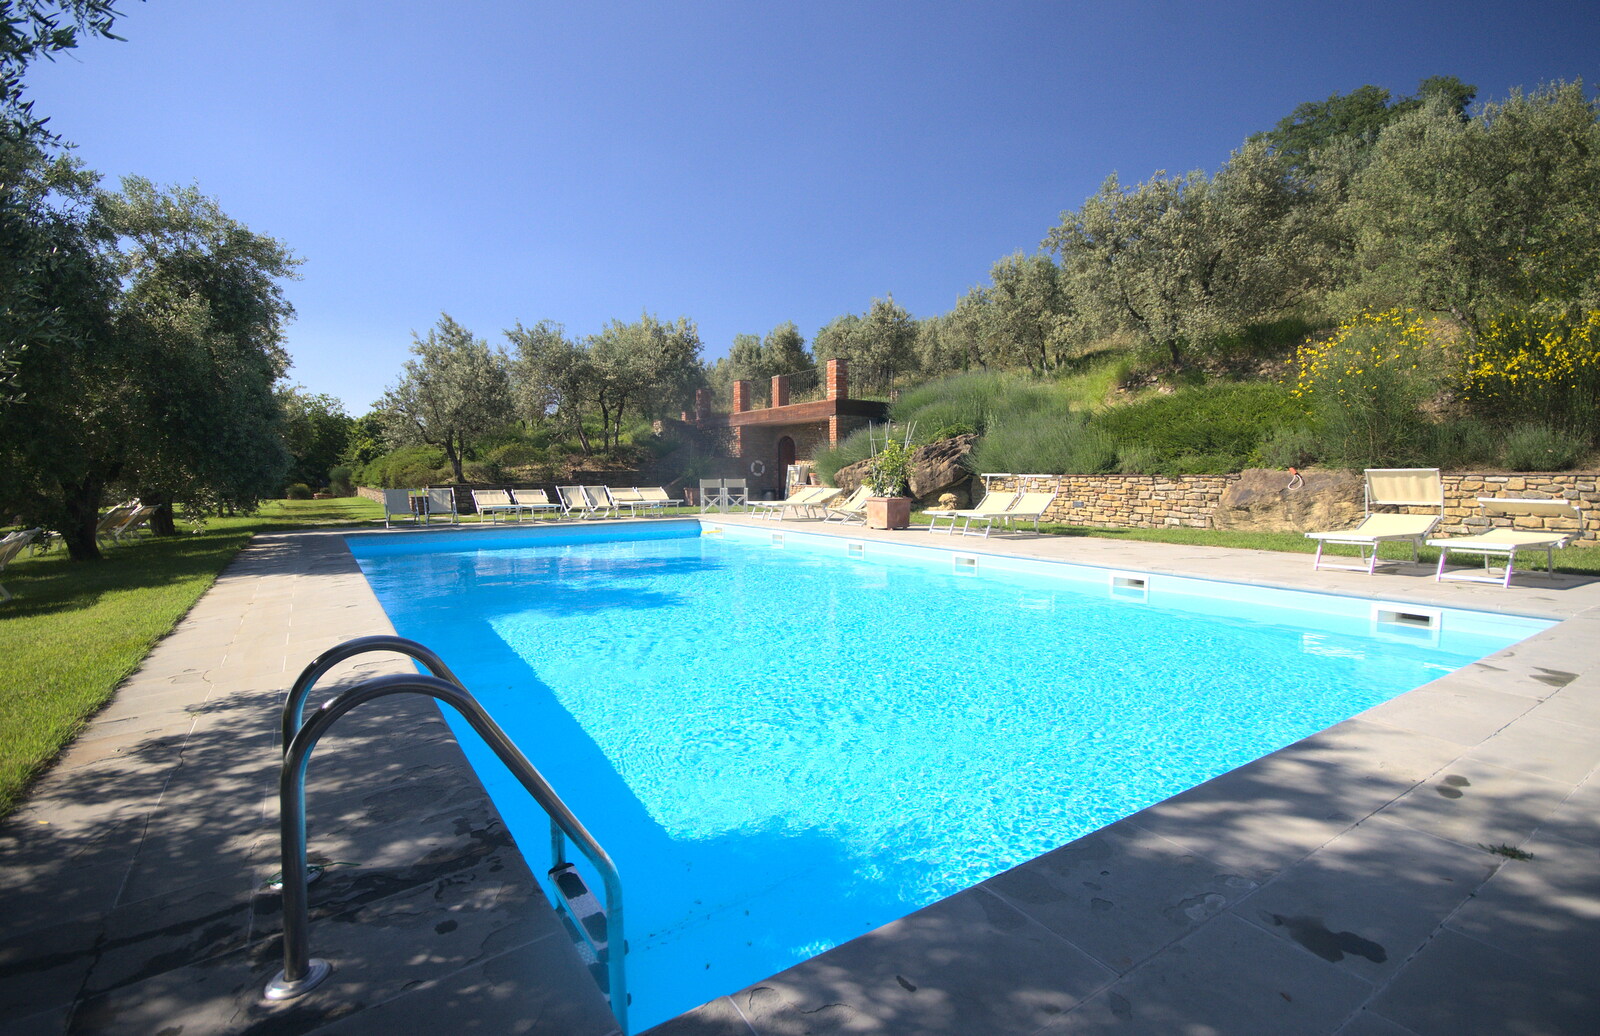 Our nice, but very cold, swimming pool from Italian Weddings, Saracens and Swimming Pools, Arezzo, Tuscany - 12th June 2013